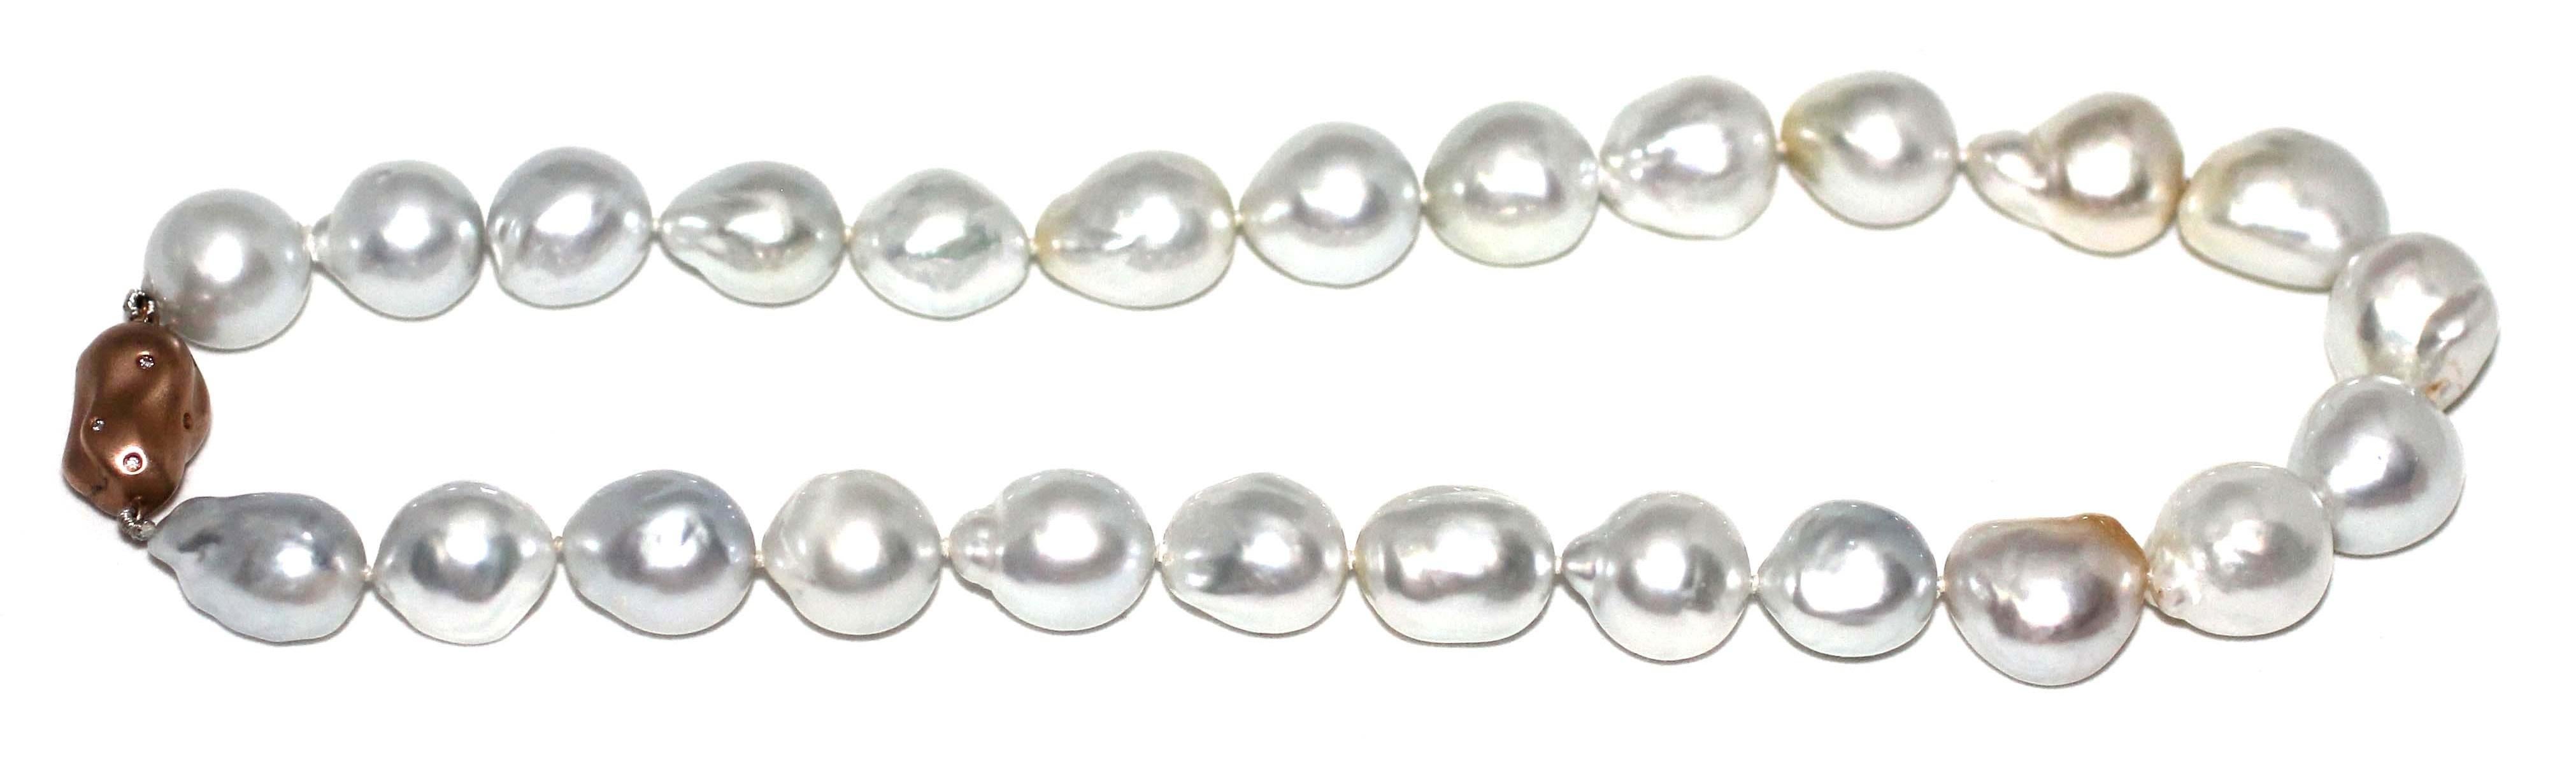 Hakimoto 15X14 mm White South Baroque Sea Pearl Necklace 18K Diamond Clasp In New Condition For Sale In New York, NY